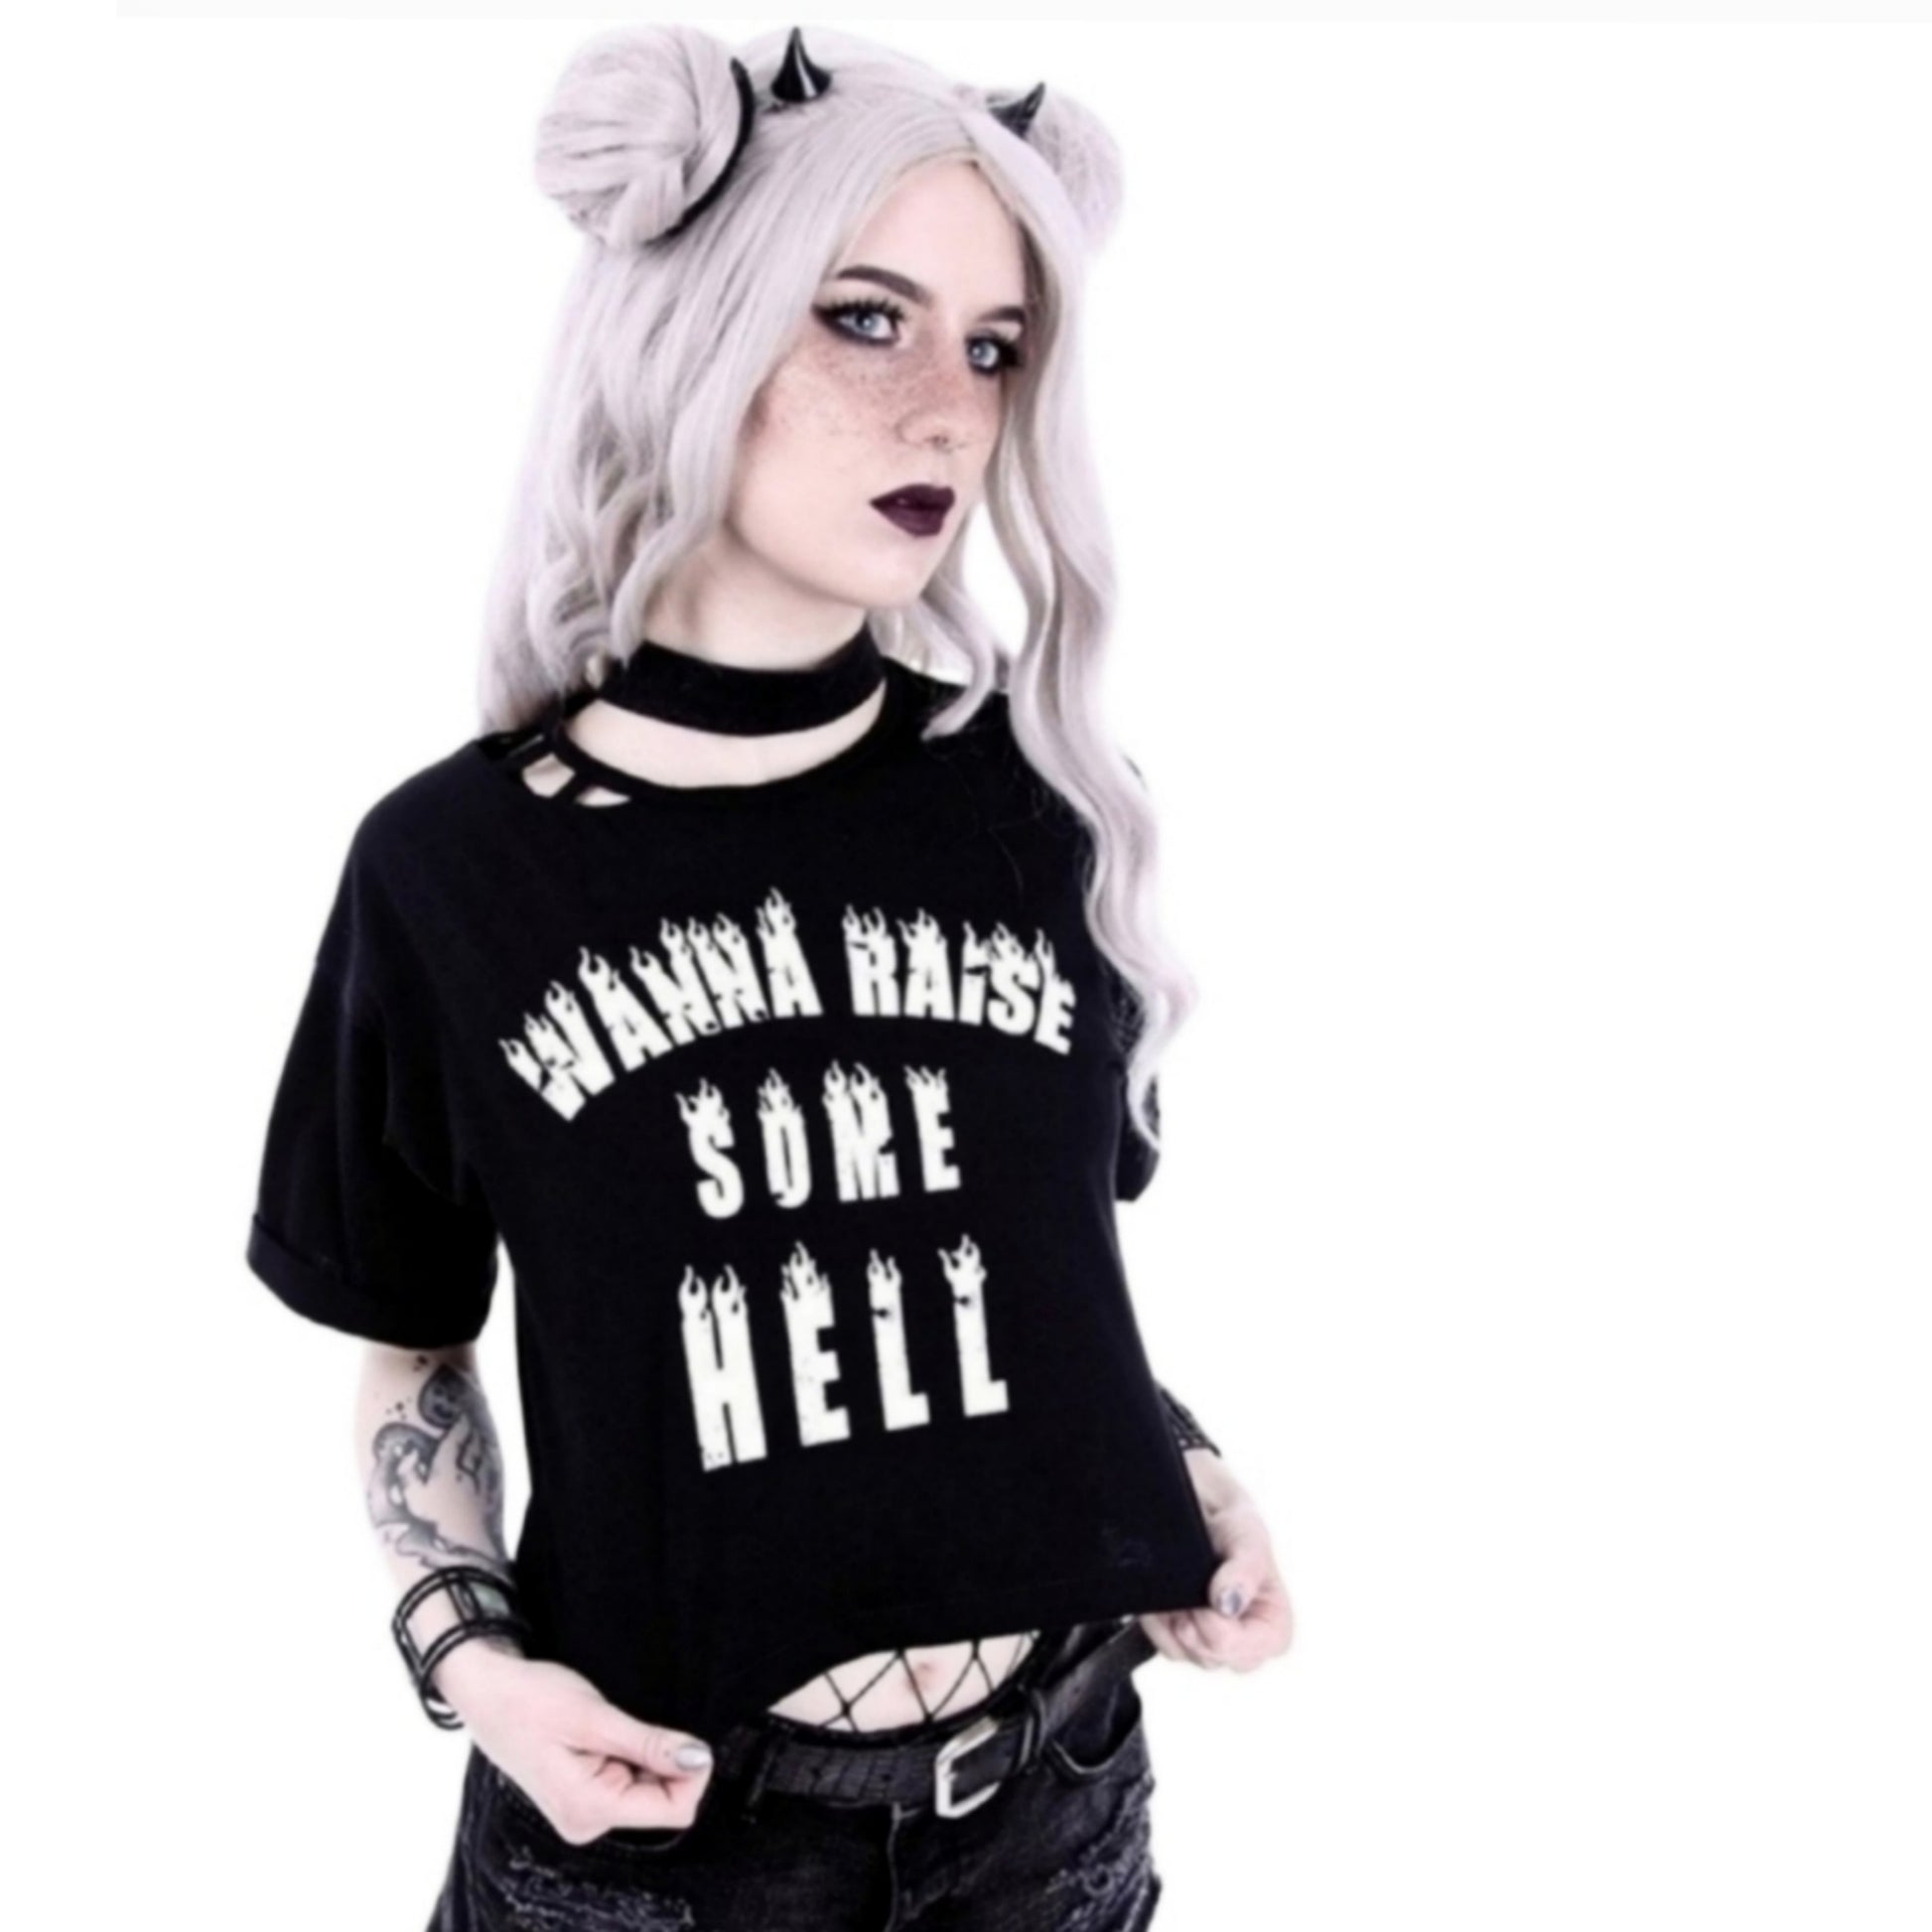 Soft Black Cotton Cropped Tee | Wanna Raise Some Hell? Gothic Crop Top - Restyle - Shirts